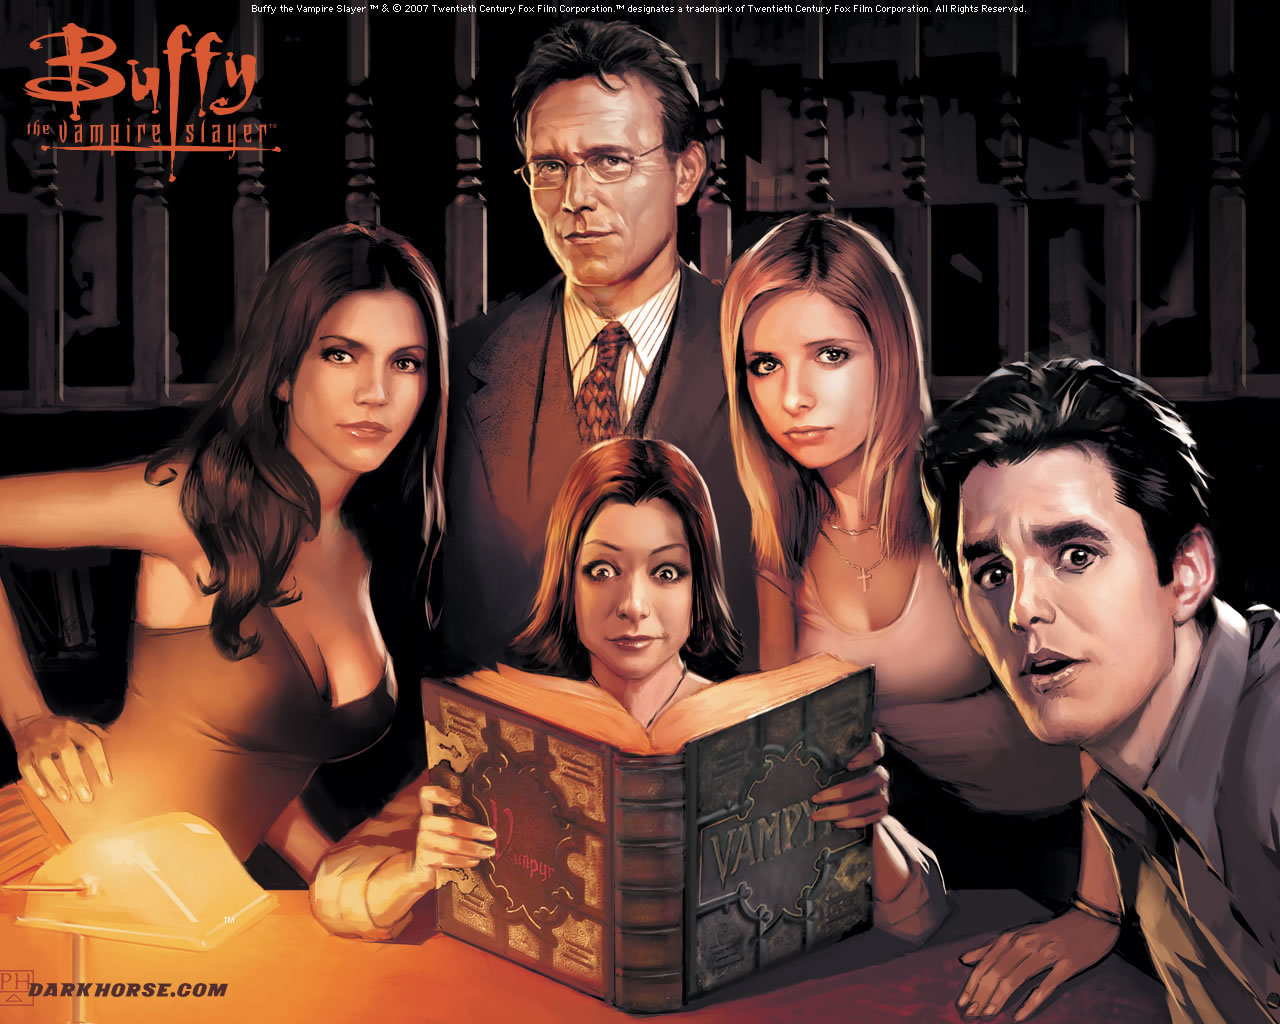 1080p Buffy The Vampire Slayer Hd Images